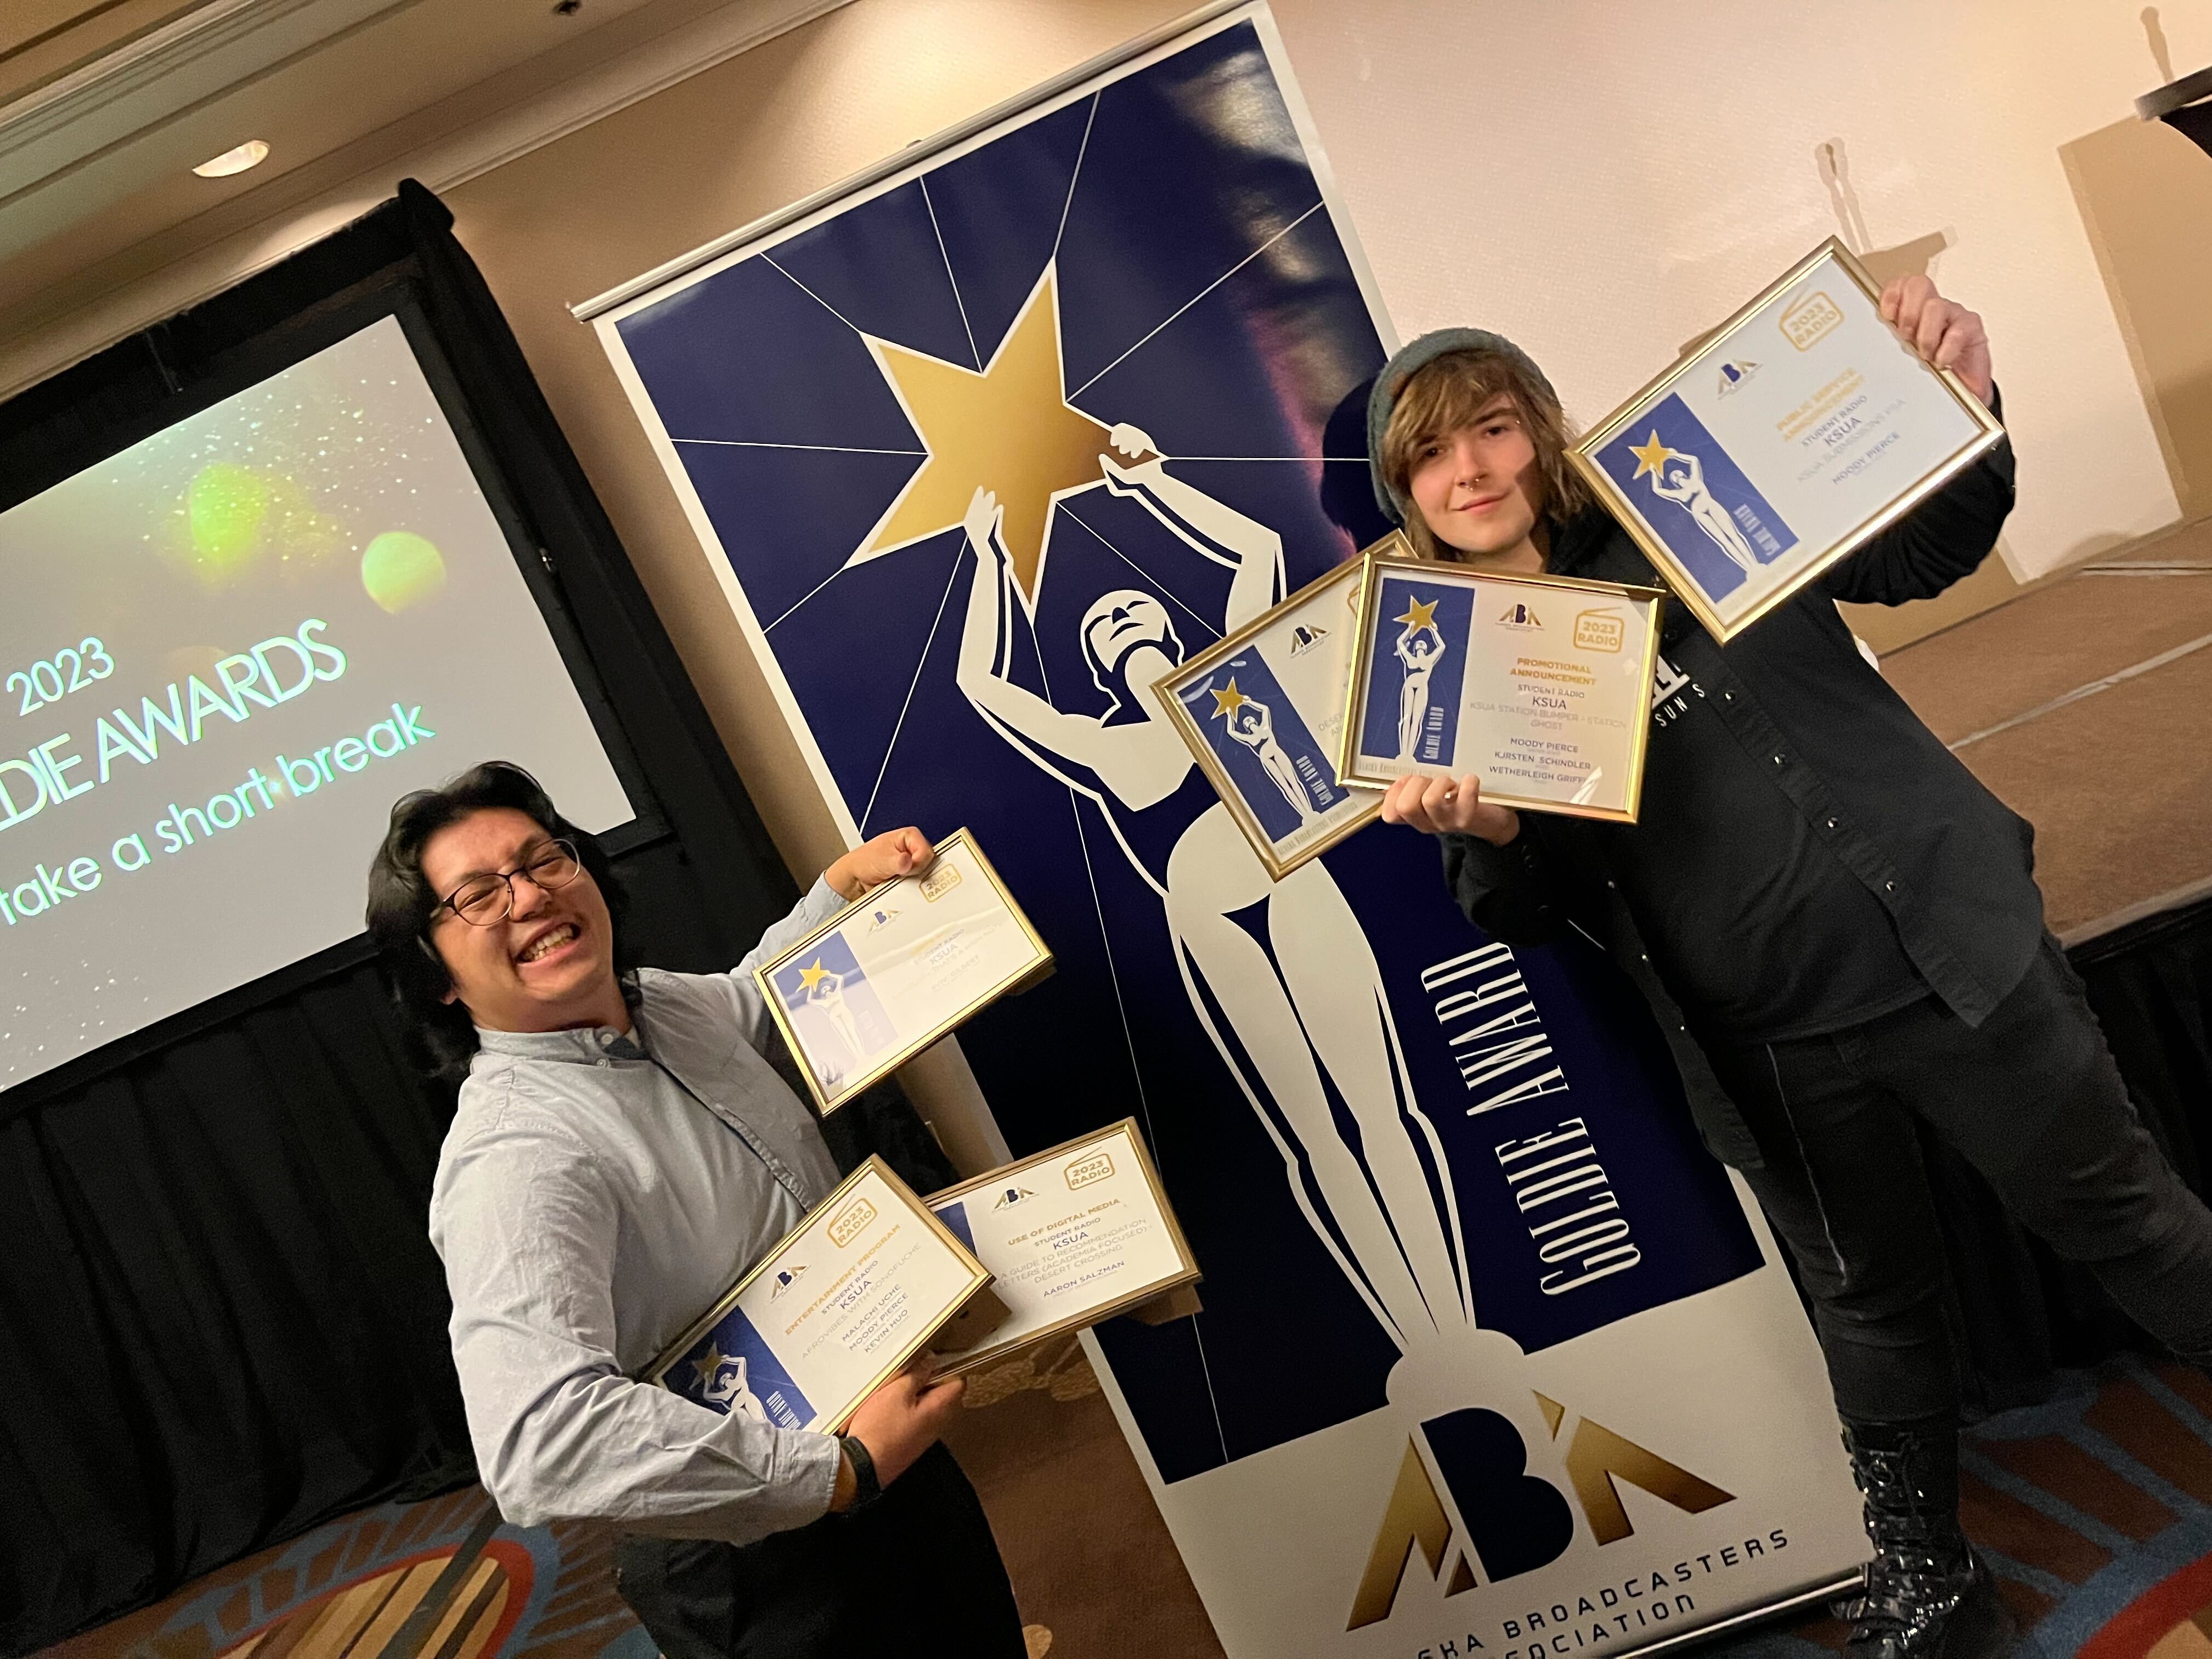 KSUA's General Manager Kevin Huo and Production Director Moody Pierce pose with Goldie awards at the Alaska Broadcasters Association Convention in Anchorage.